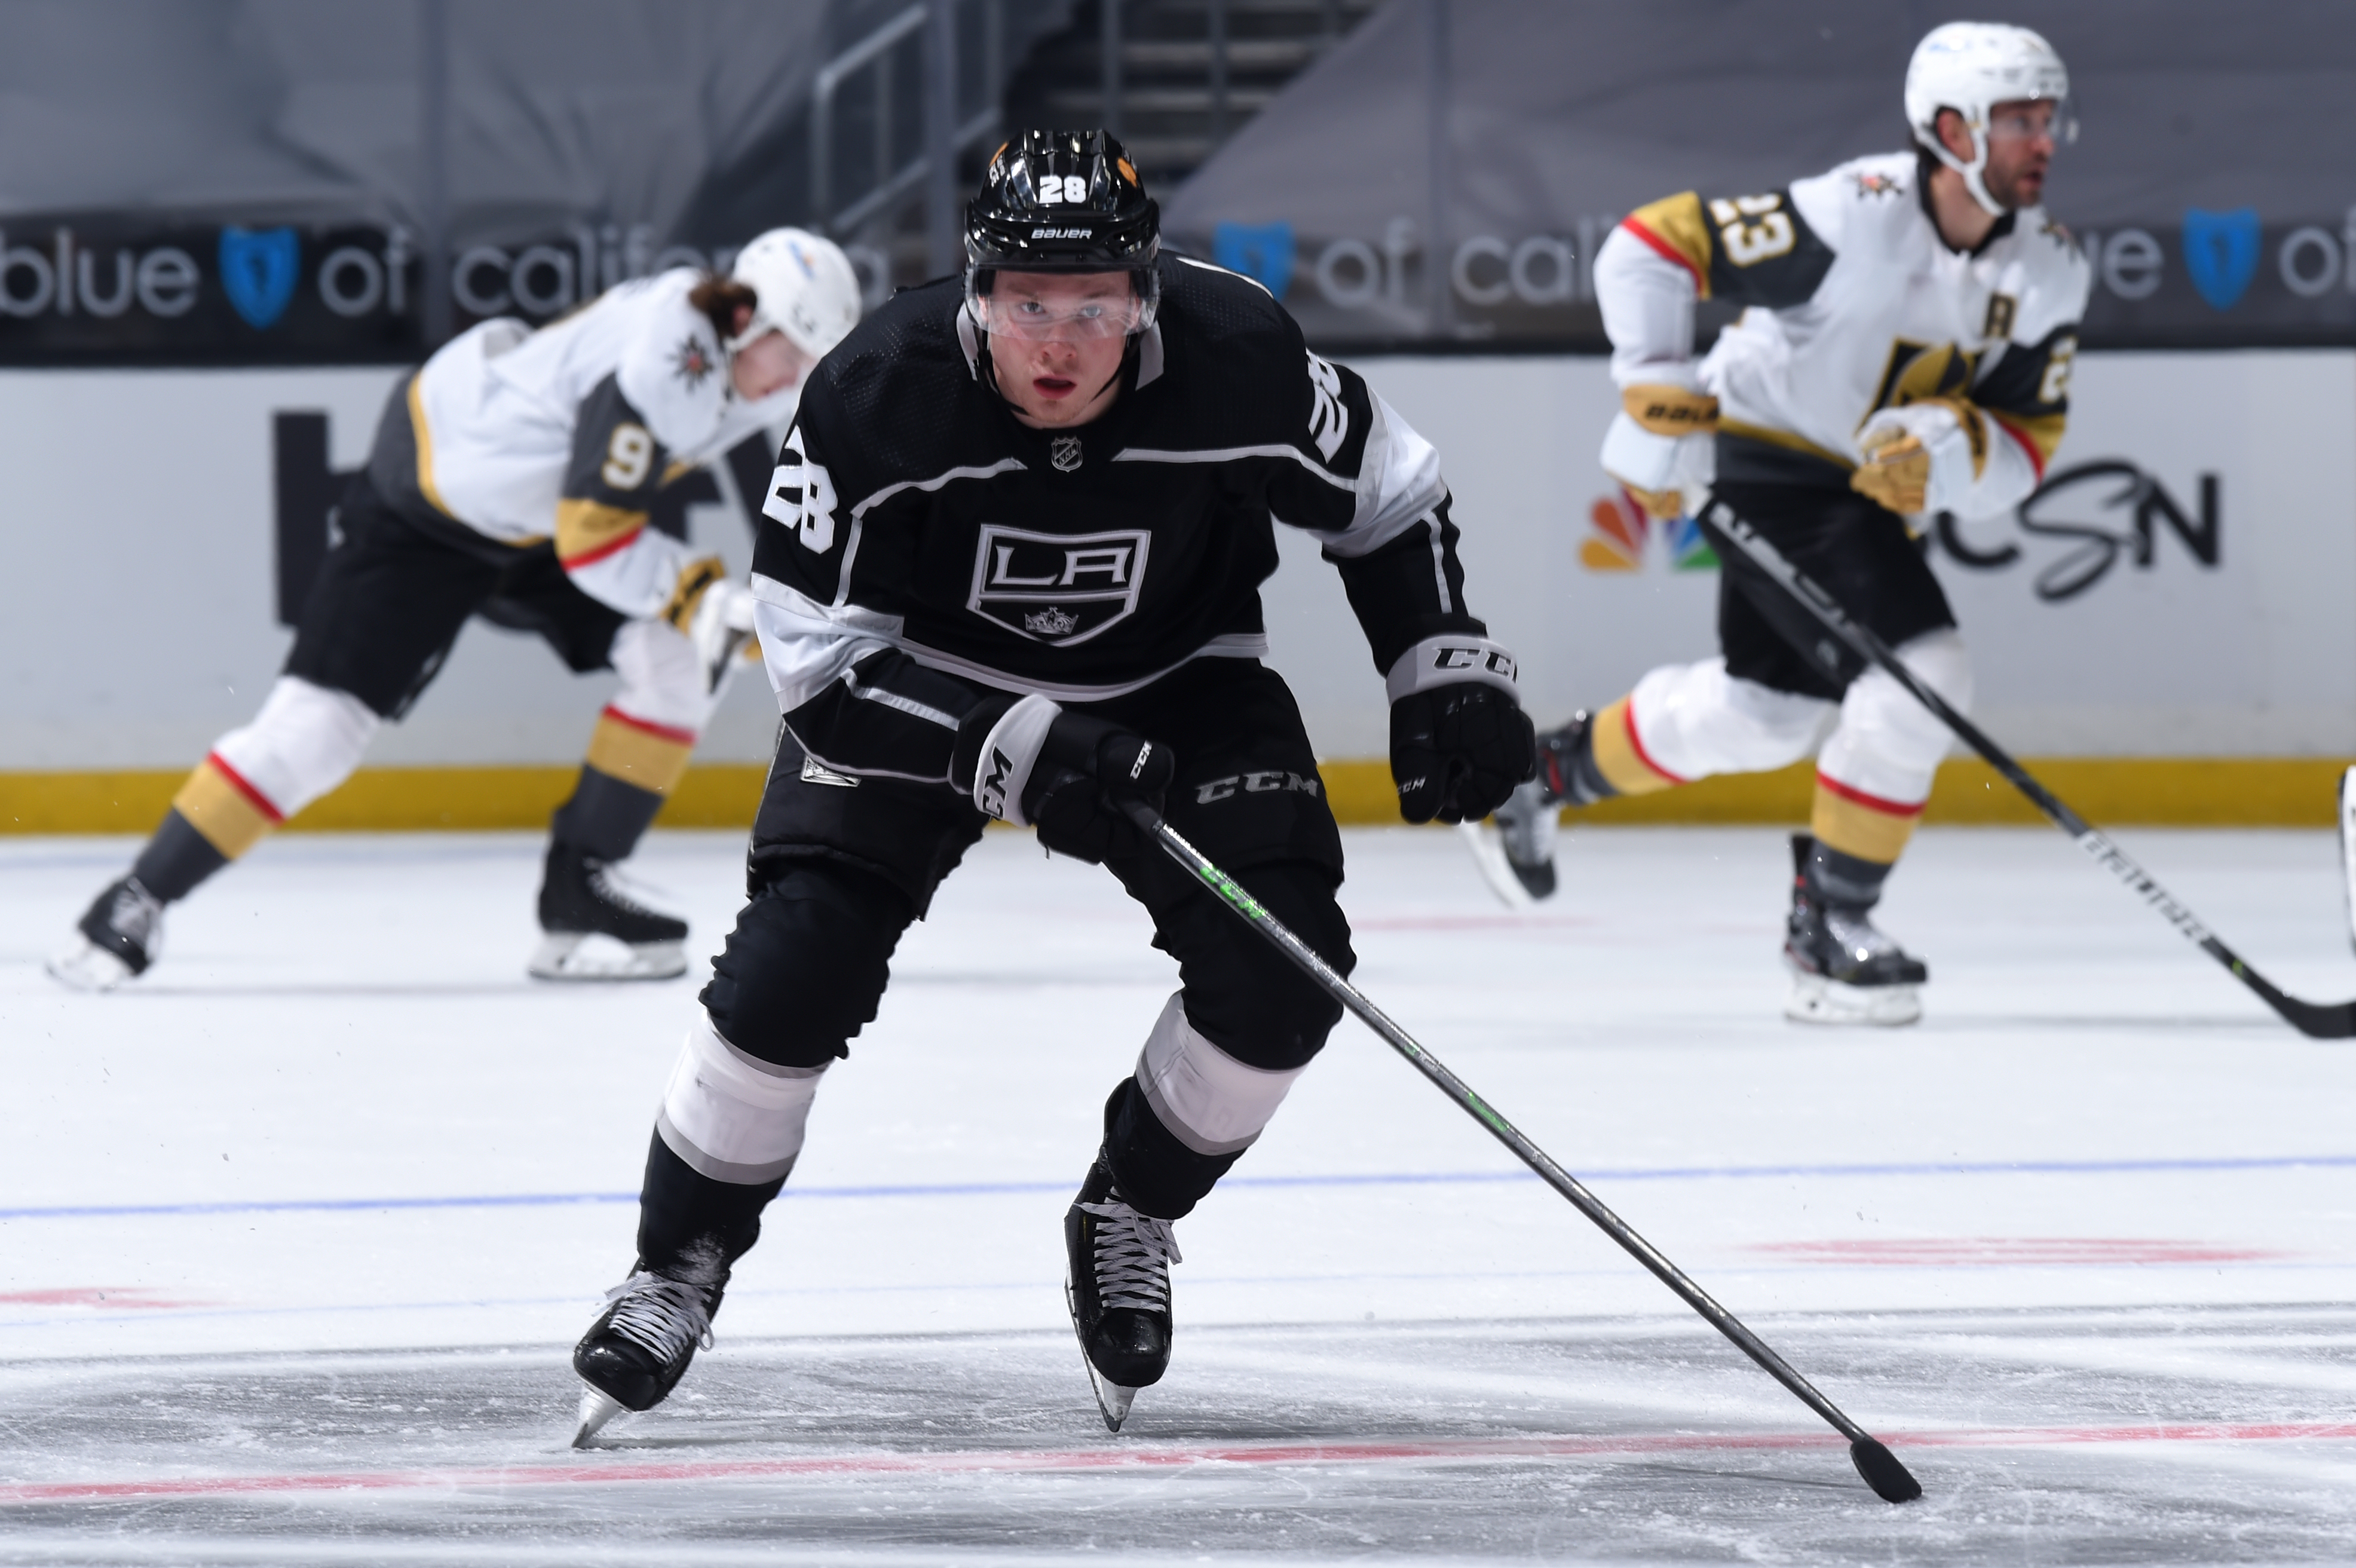 Jaret Anderson-Dolan #28 of the Los Angeles Kings skates on the ice during the second period against the Vegas Golden Knights at STAPLES Center on March 21, 2021 in Los Angeles, California.